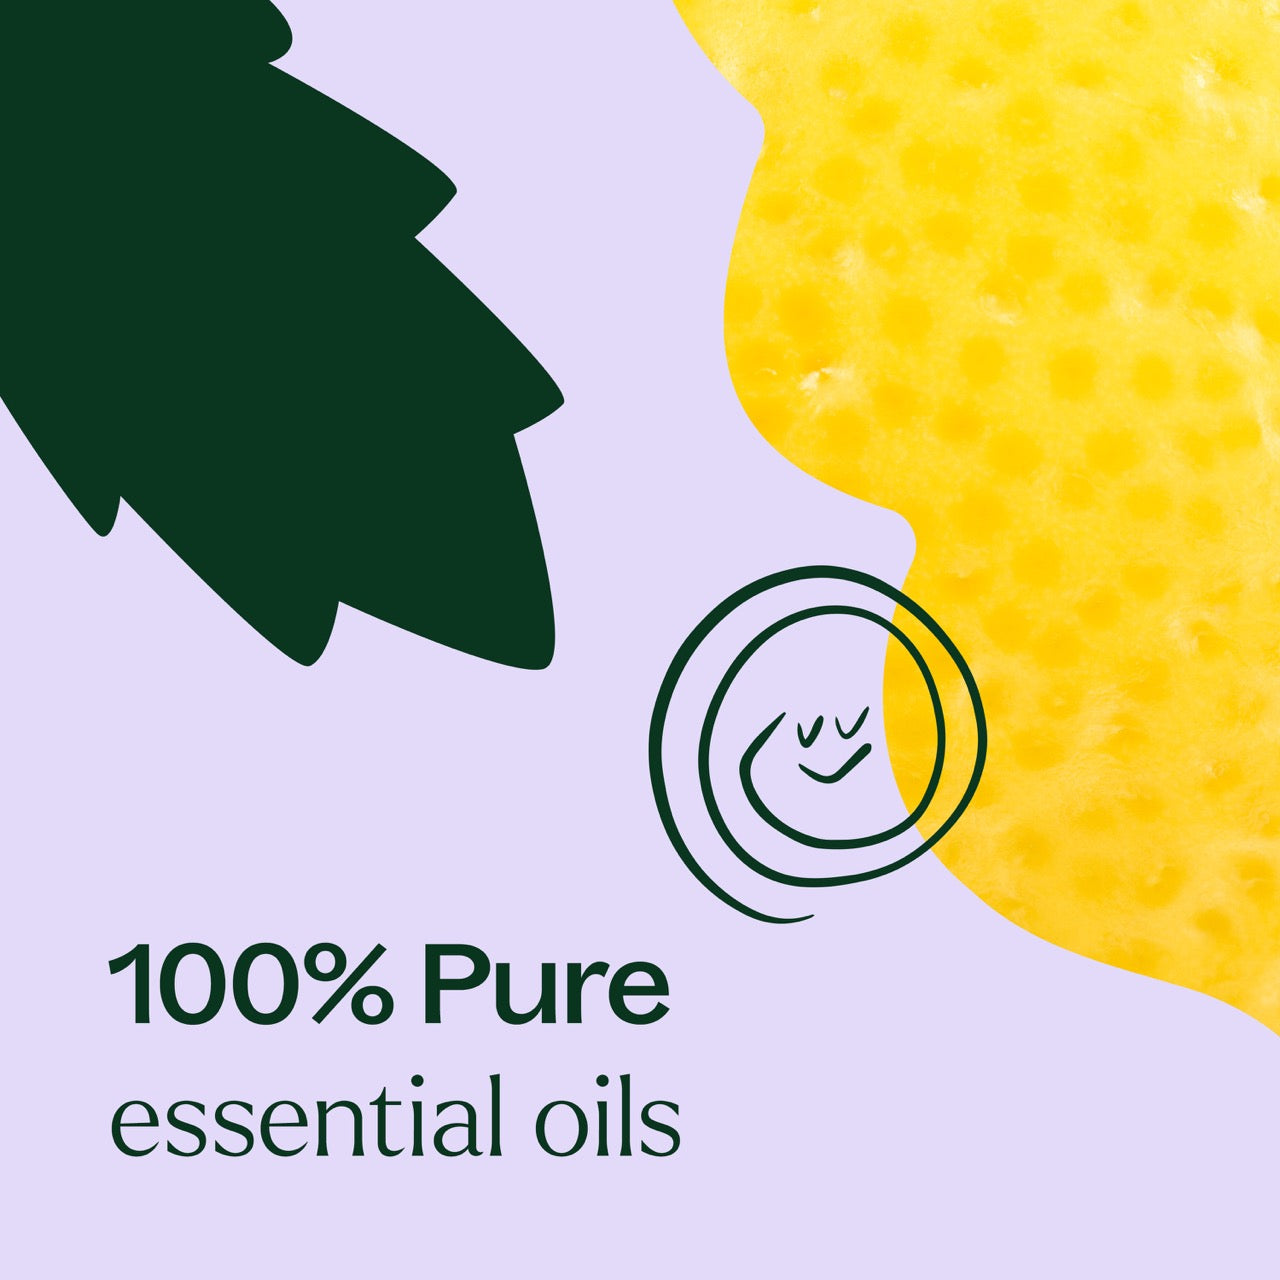 Quiet Cough™ KidSafe Essential Oil Blend is made from 100% pure essential oils